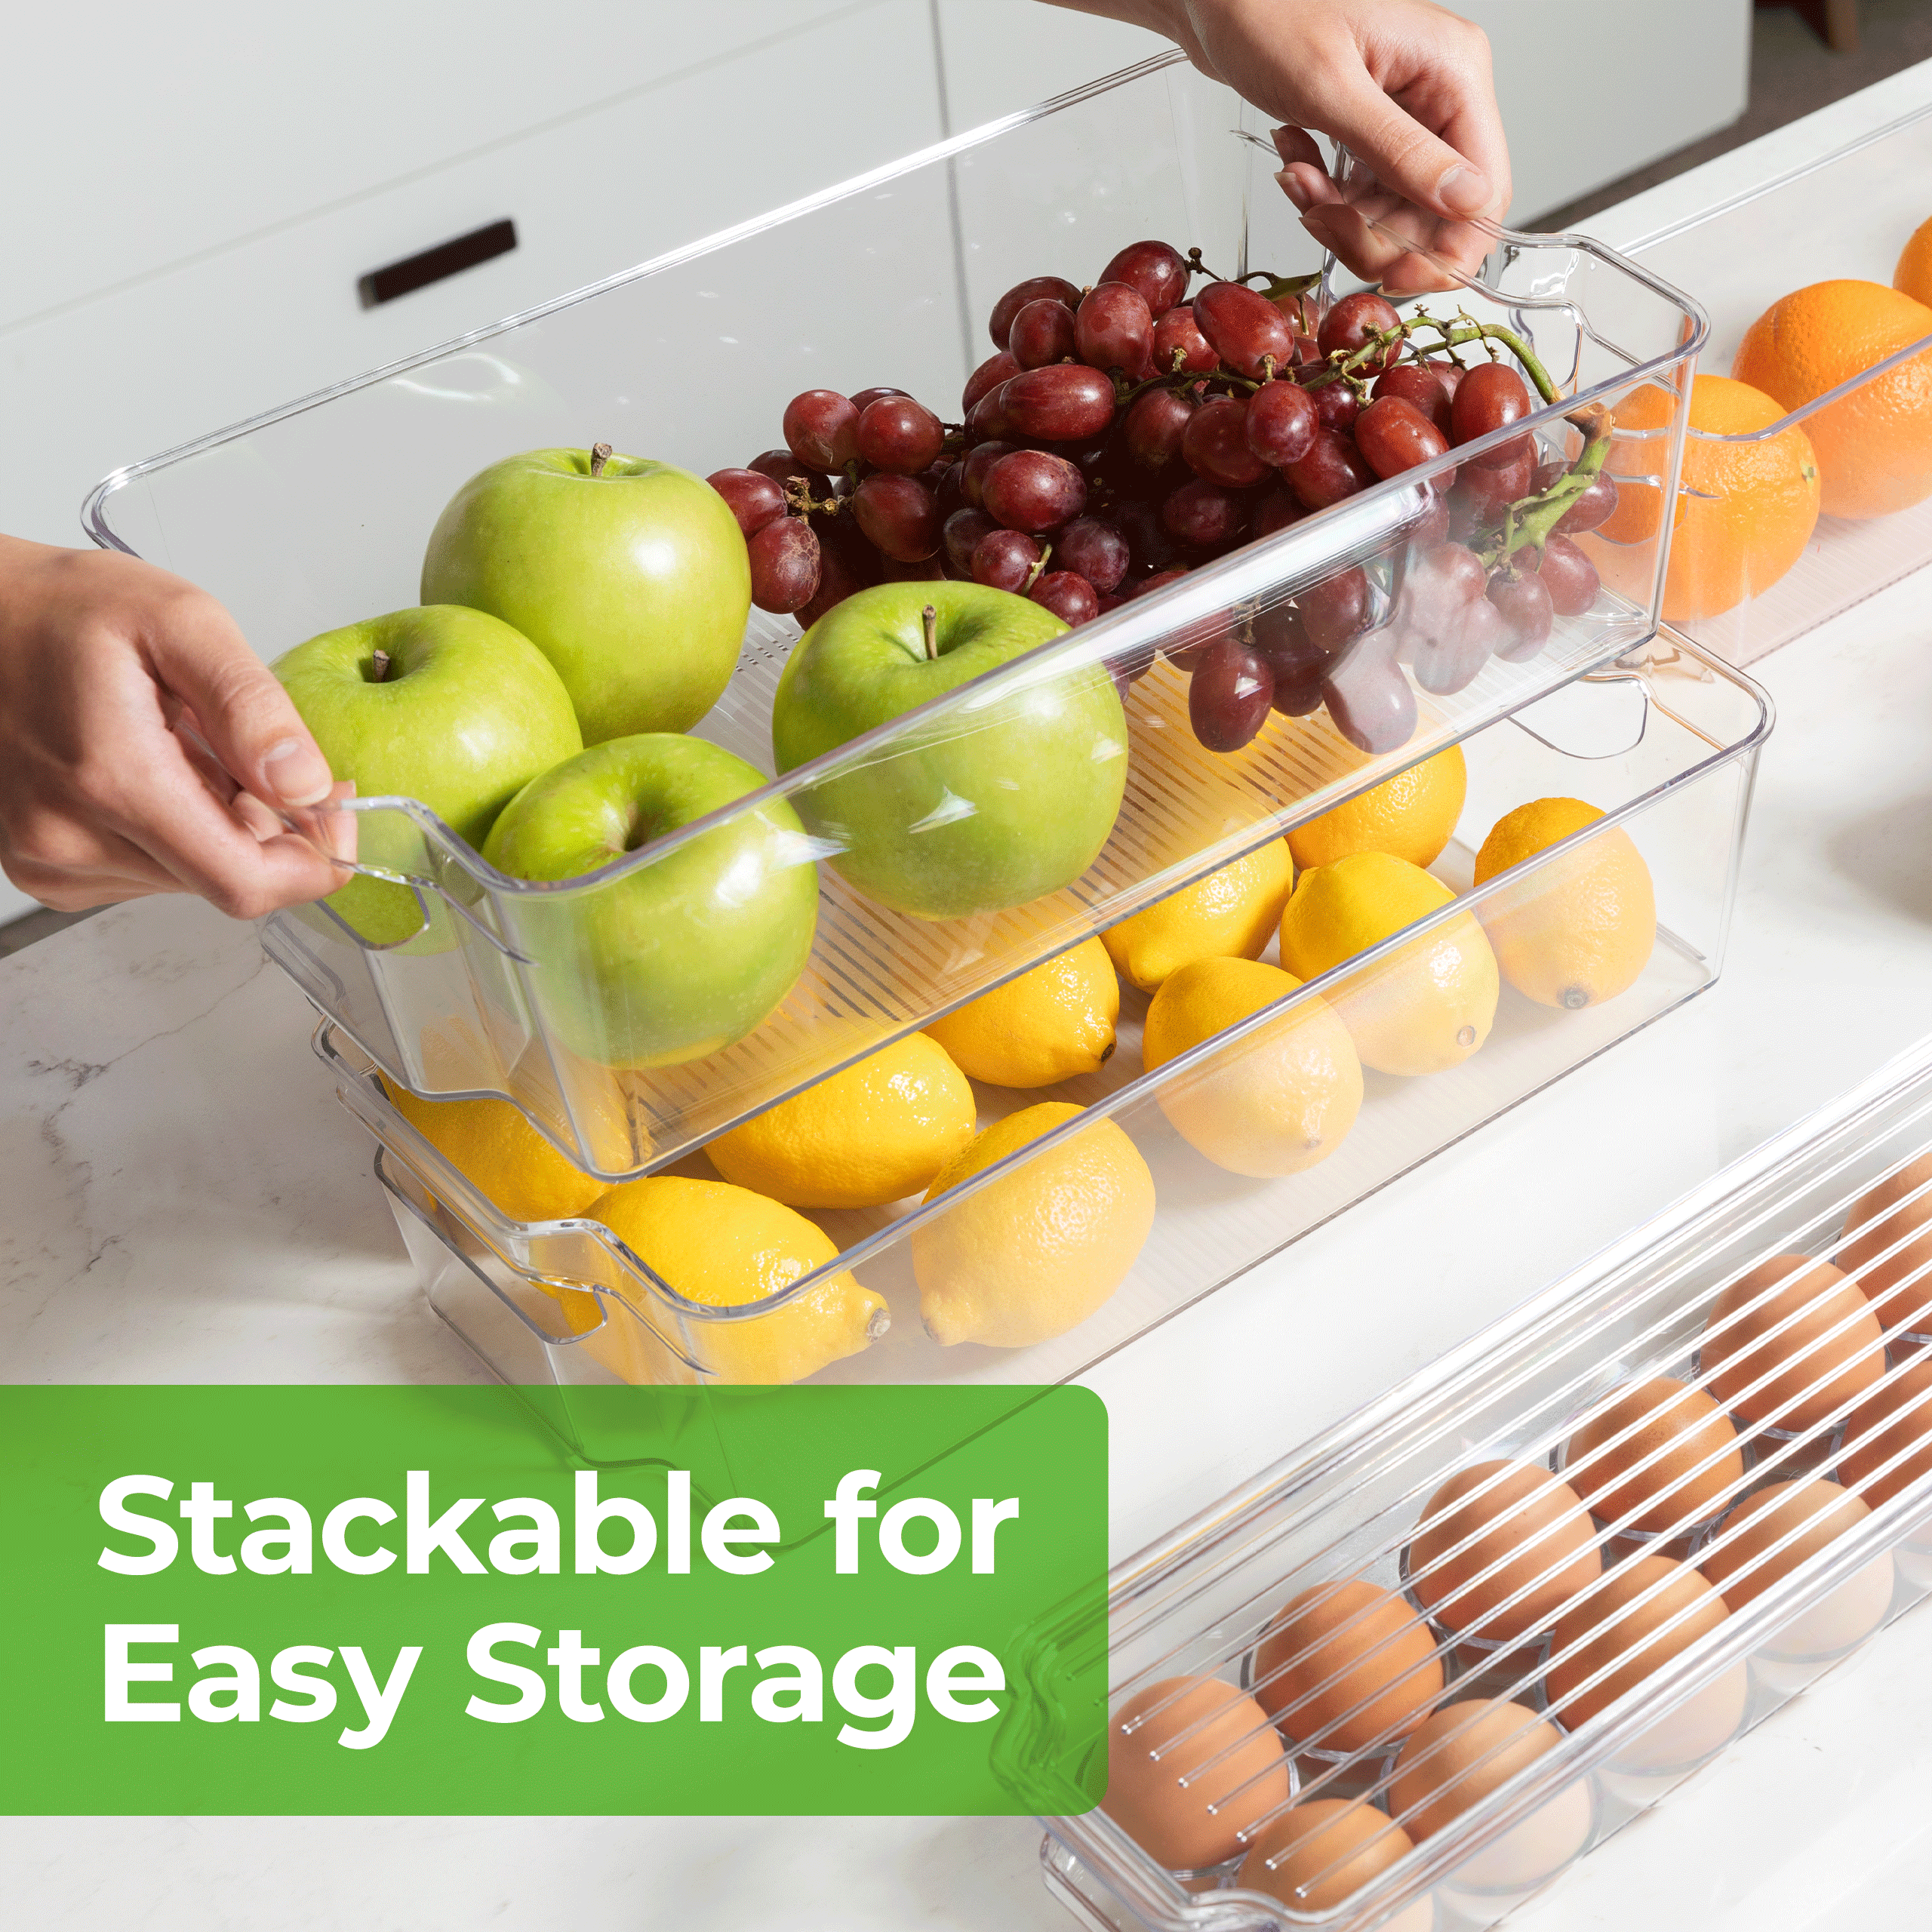 Greenco Refrigerator Organizer Bins for Eggs - Eggs Container for  Refrigerator - 14 Egg Organizer Container with Lid & Durable Handle -  Stackable